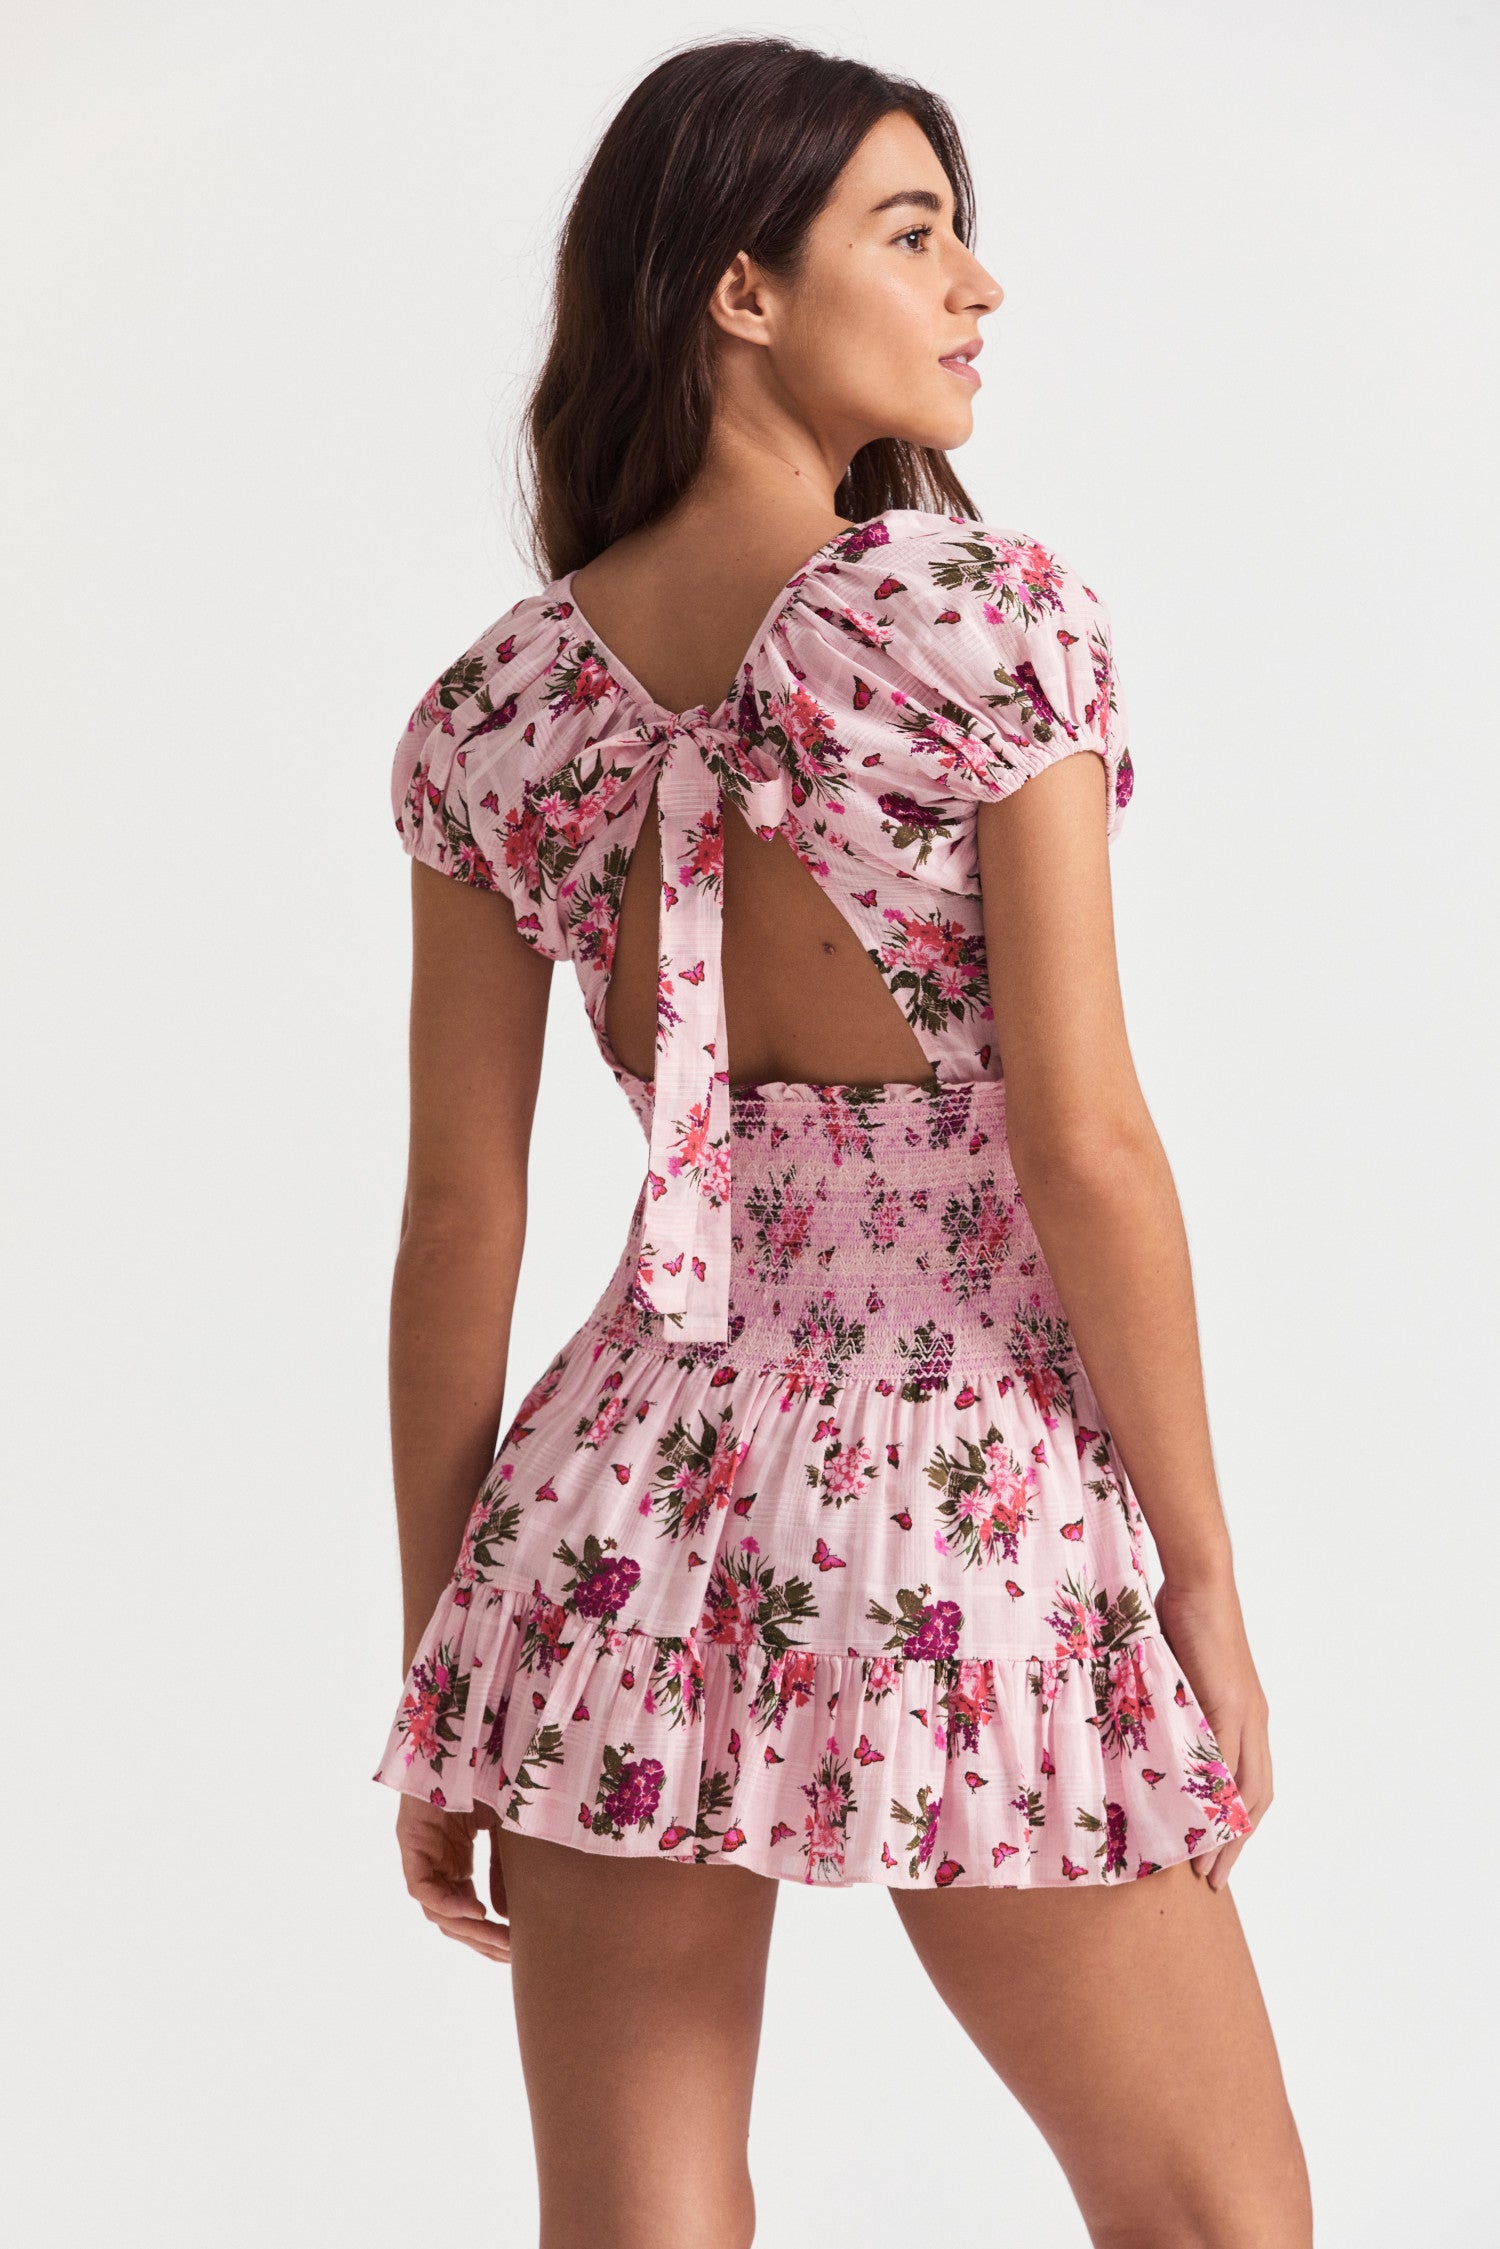 Pink floral mini dress with smocking detail, an elasticated neck opening, short puff sleeves, a flowy skirt, and a bow revealing a slightly open back. 